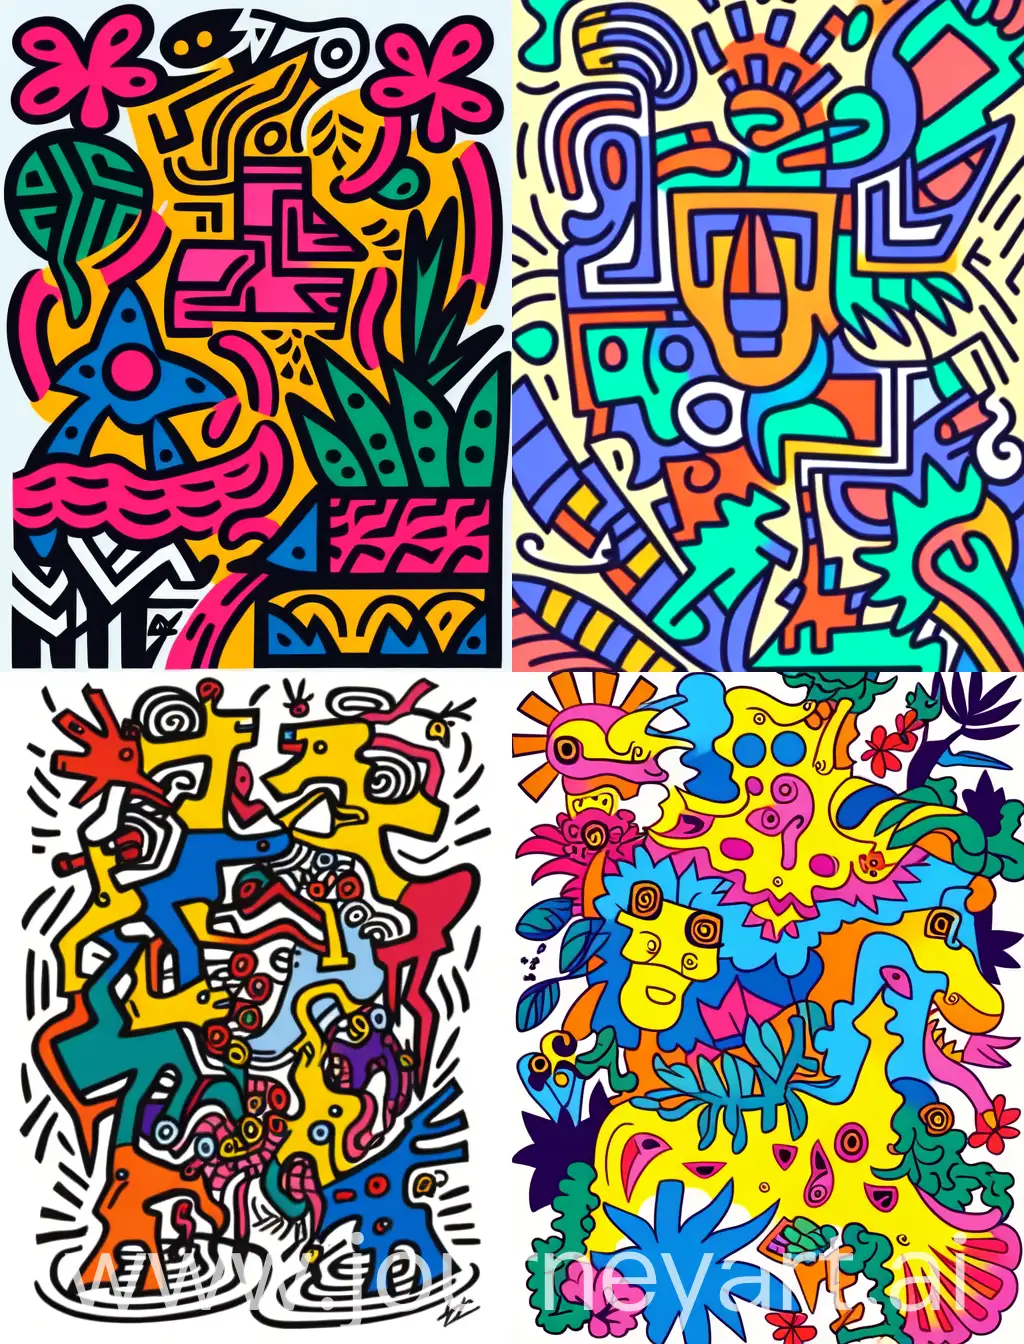 Bold-and-Colorful-Nature-Cartoons-in-Keith-Haring-Style